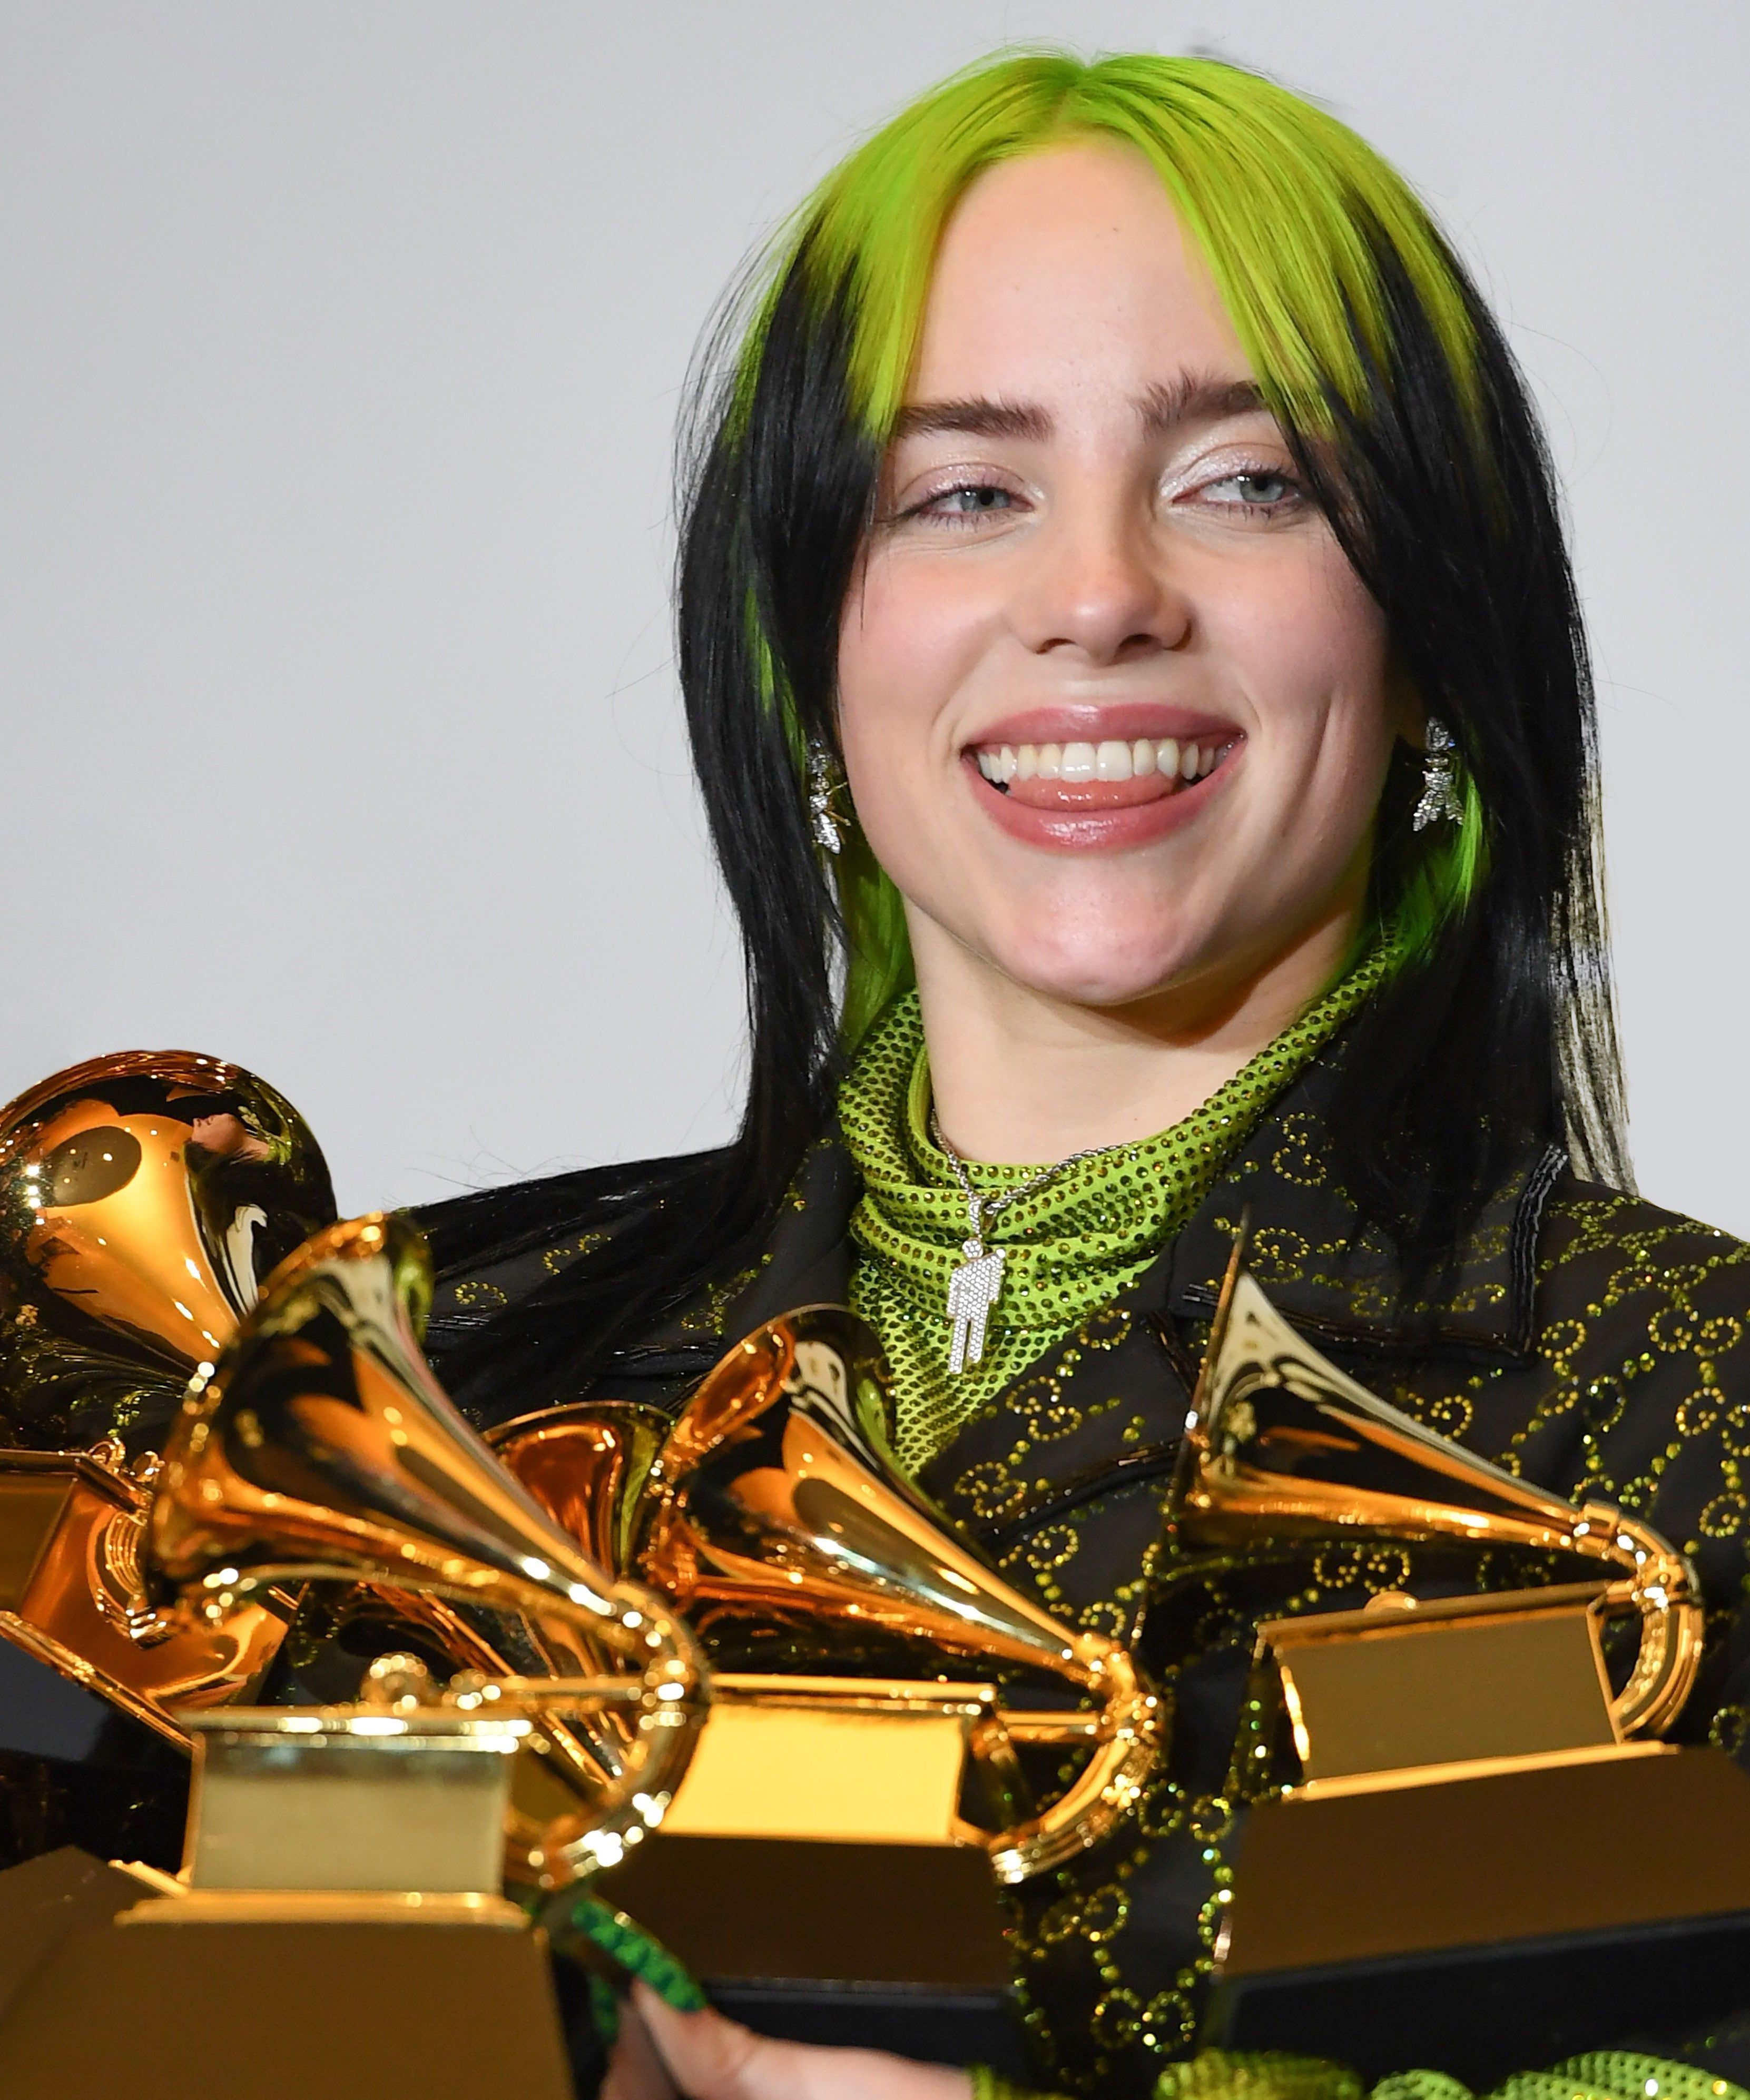 Billie Eilish Dyes Hair Blonde Color With '70s Haircut